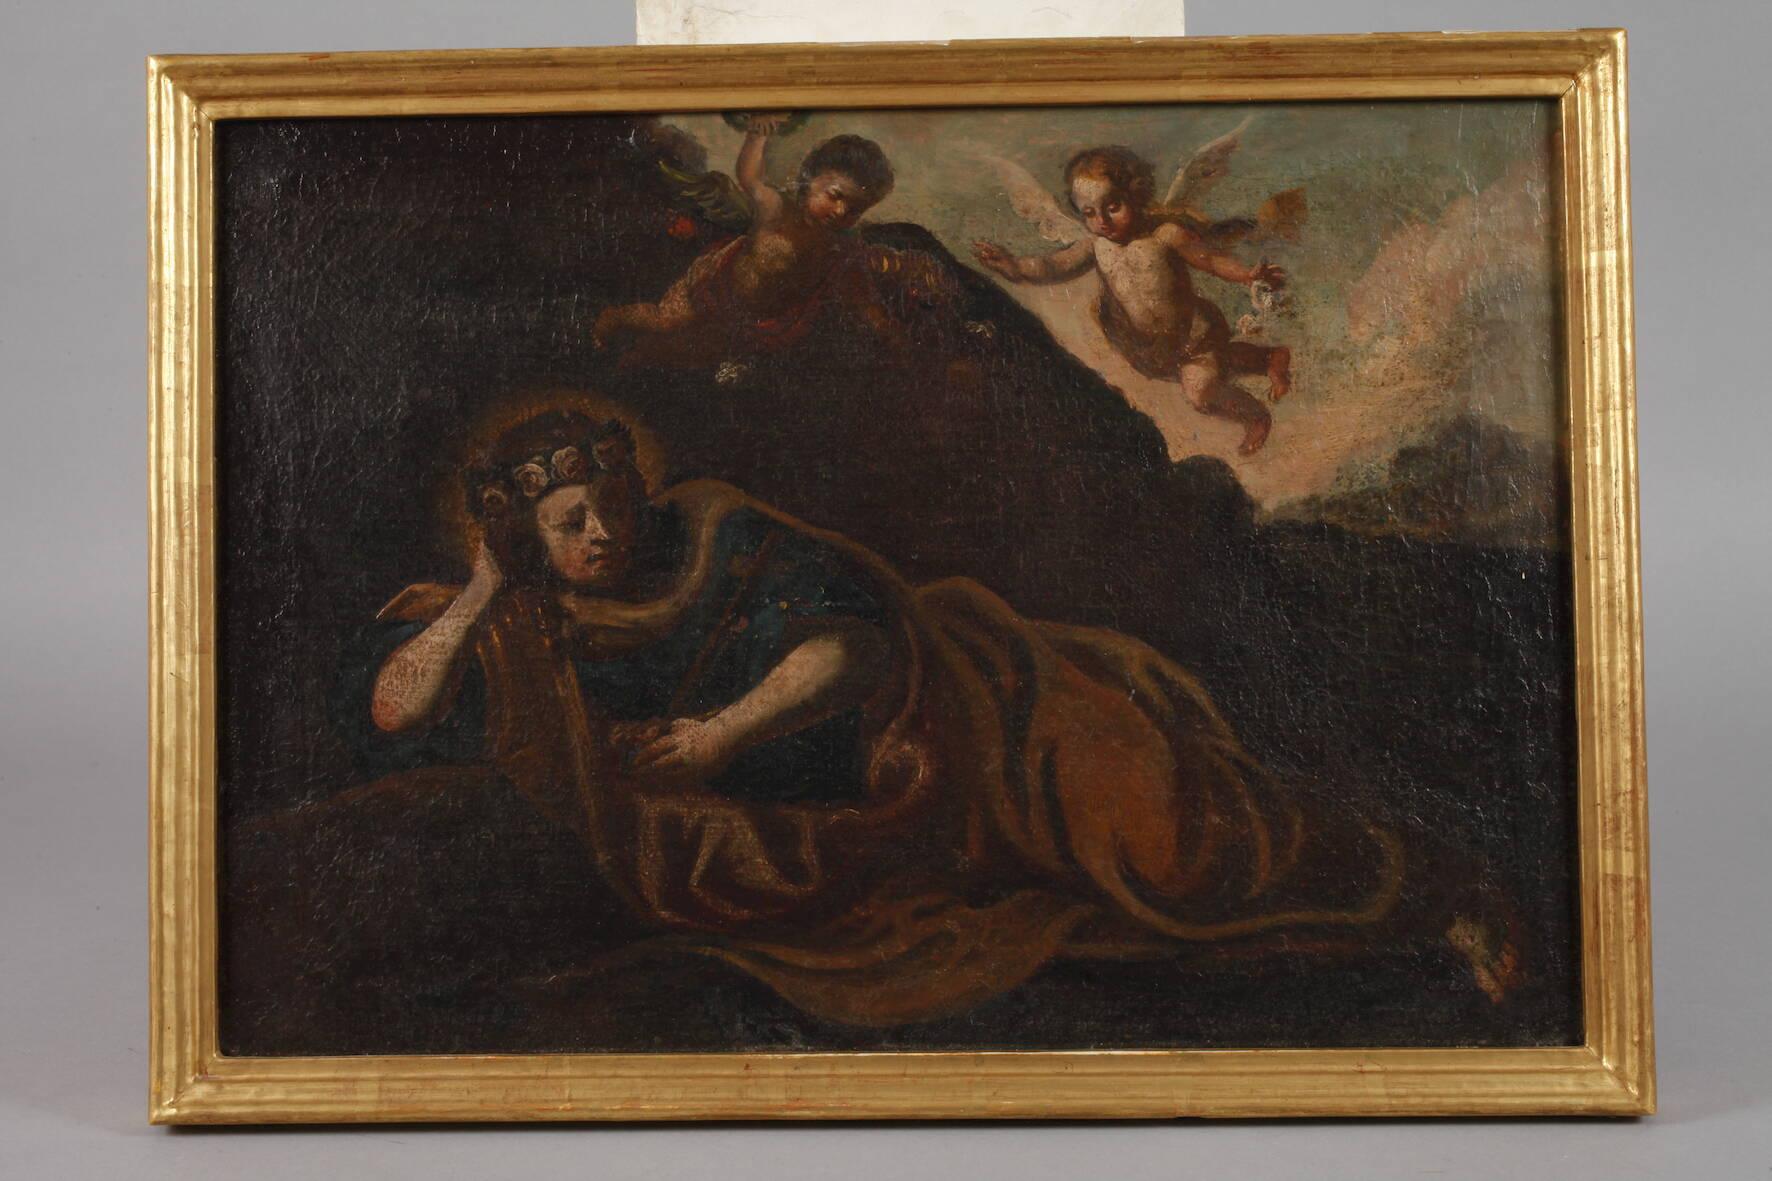 FINE EARLY 1700'S ITALIAN BAROQUE OLD MASTER - MARY MAGDALENE WITH CHERUBS - Painting by Italian Baroque